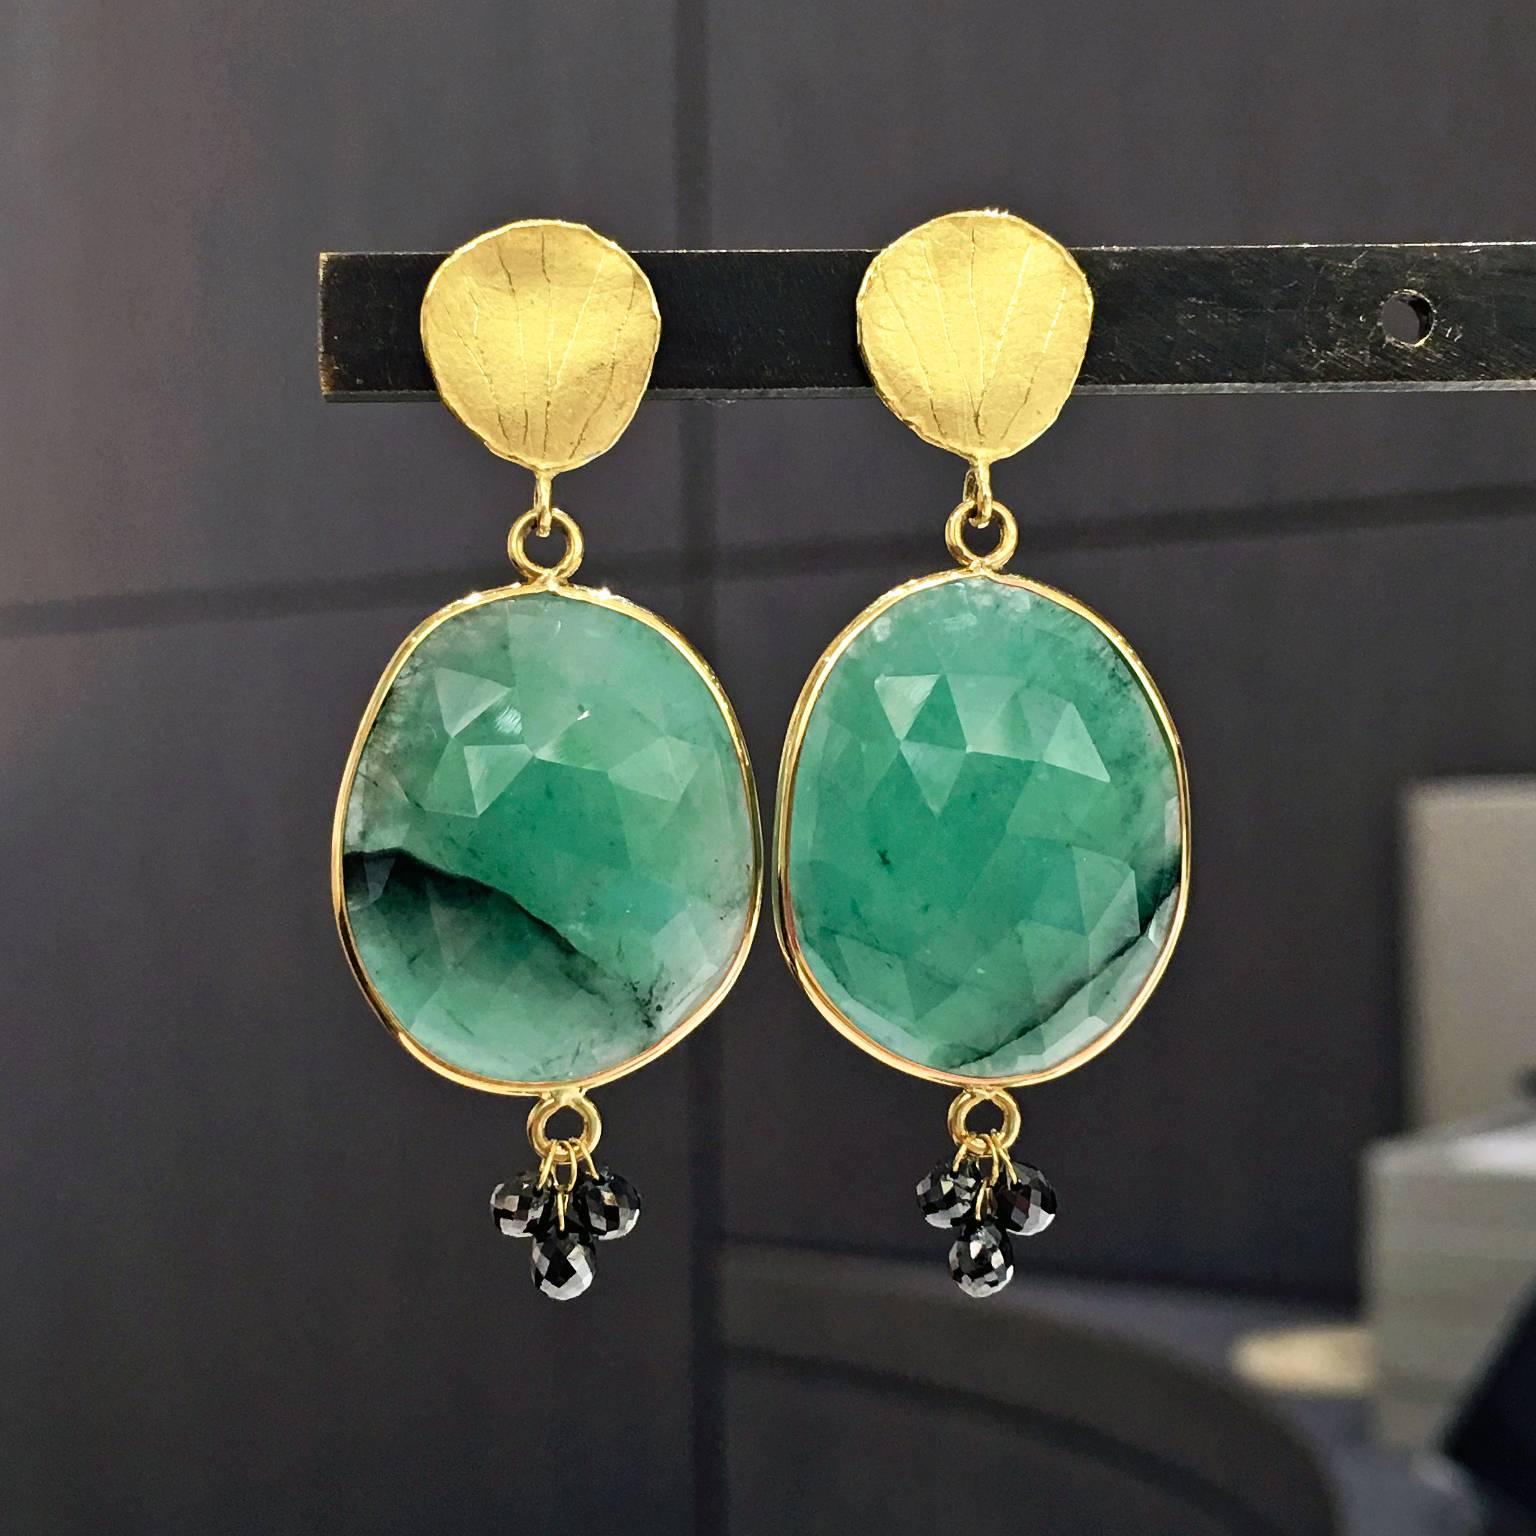 One of a Kind Petal Dangle Earrings handcrafted by award-winning jewelry designer Barbara Heinrich in matte-finished 18k yellow gold with gorgeous faceted emerald slices accented with six black diamond briolettes totaling 1.31 carats. 

18k posts